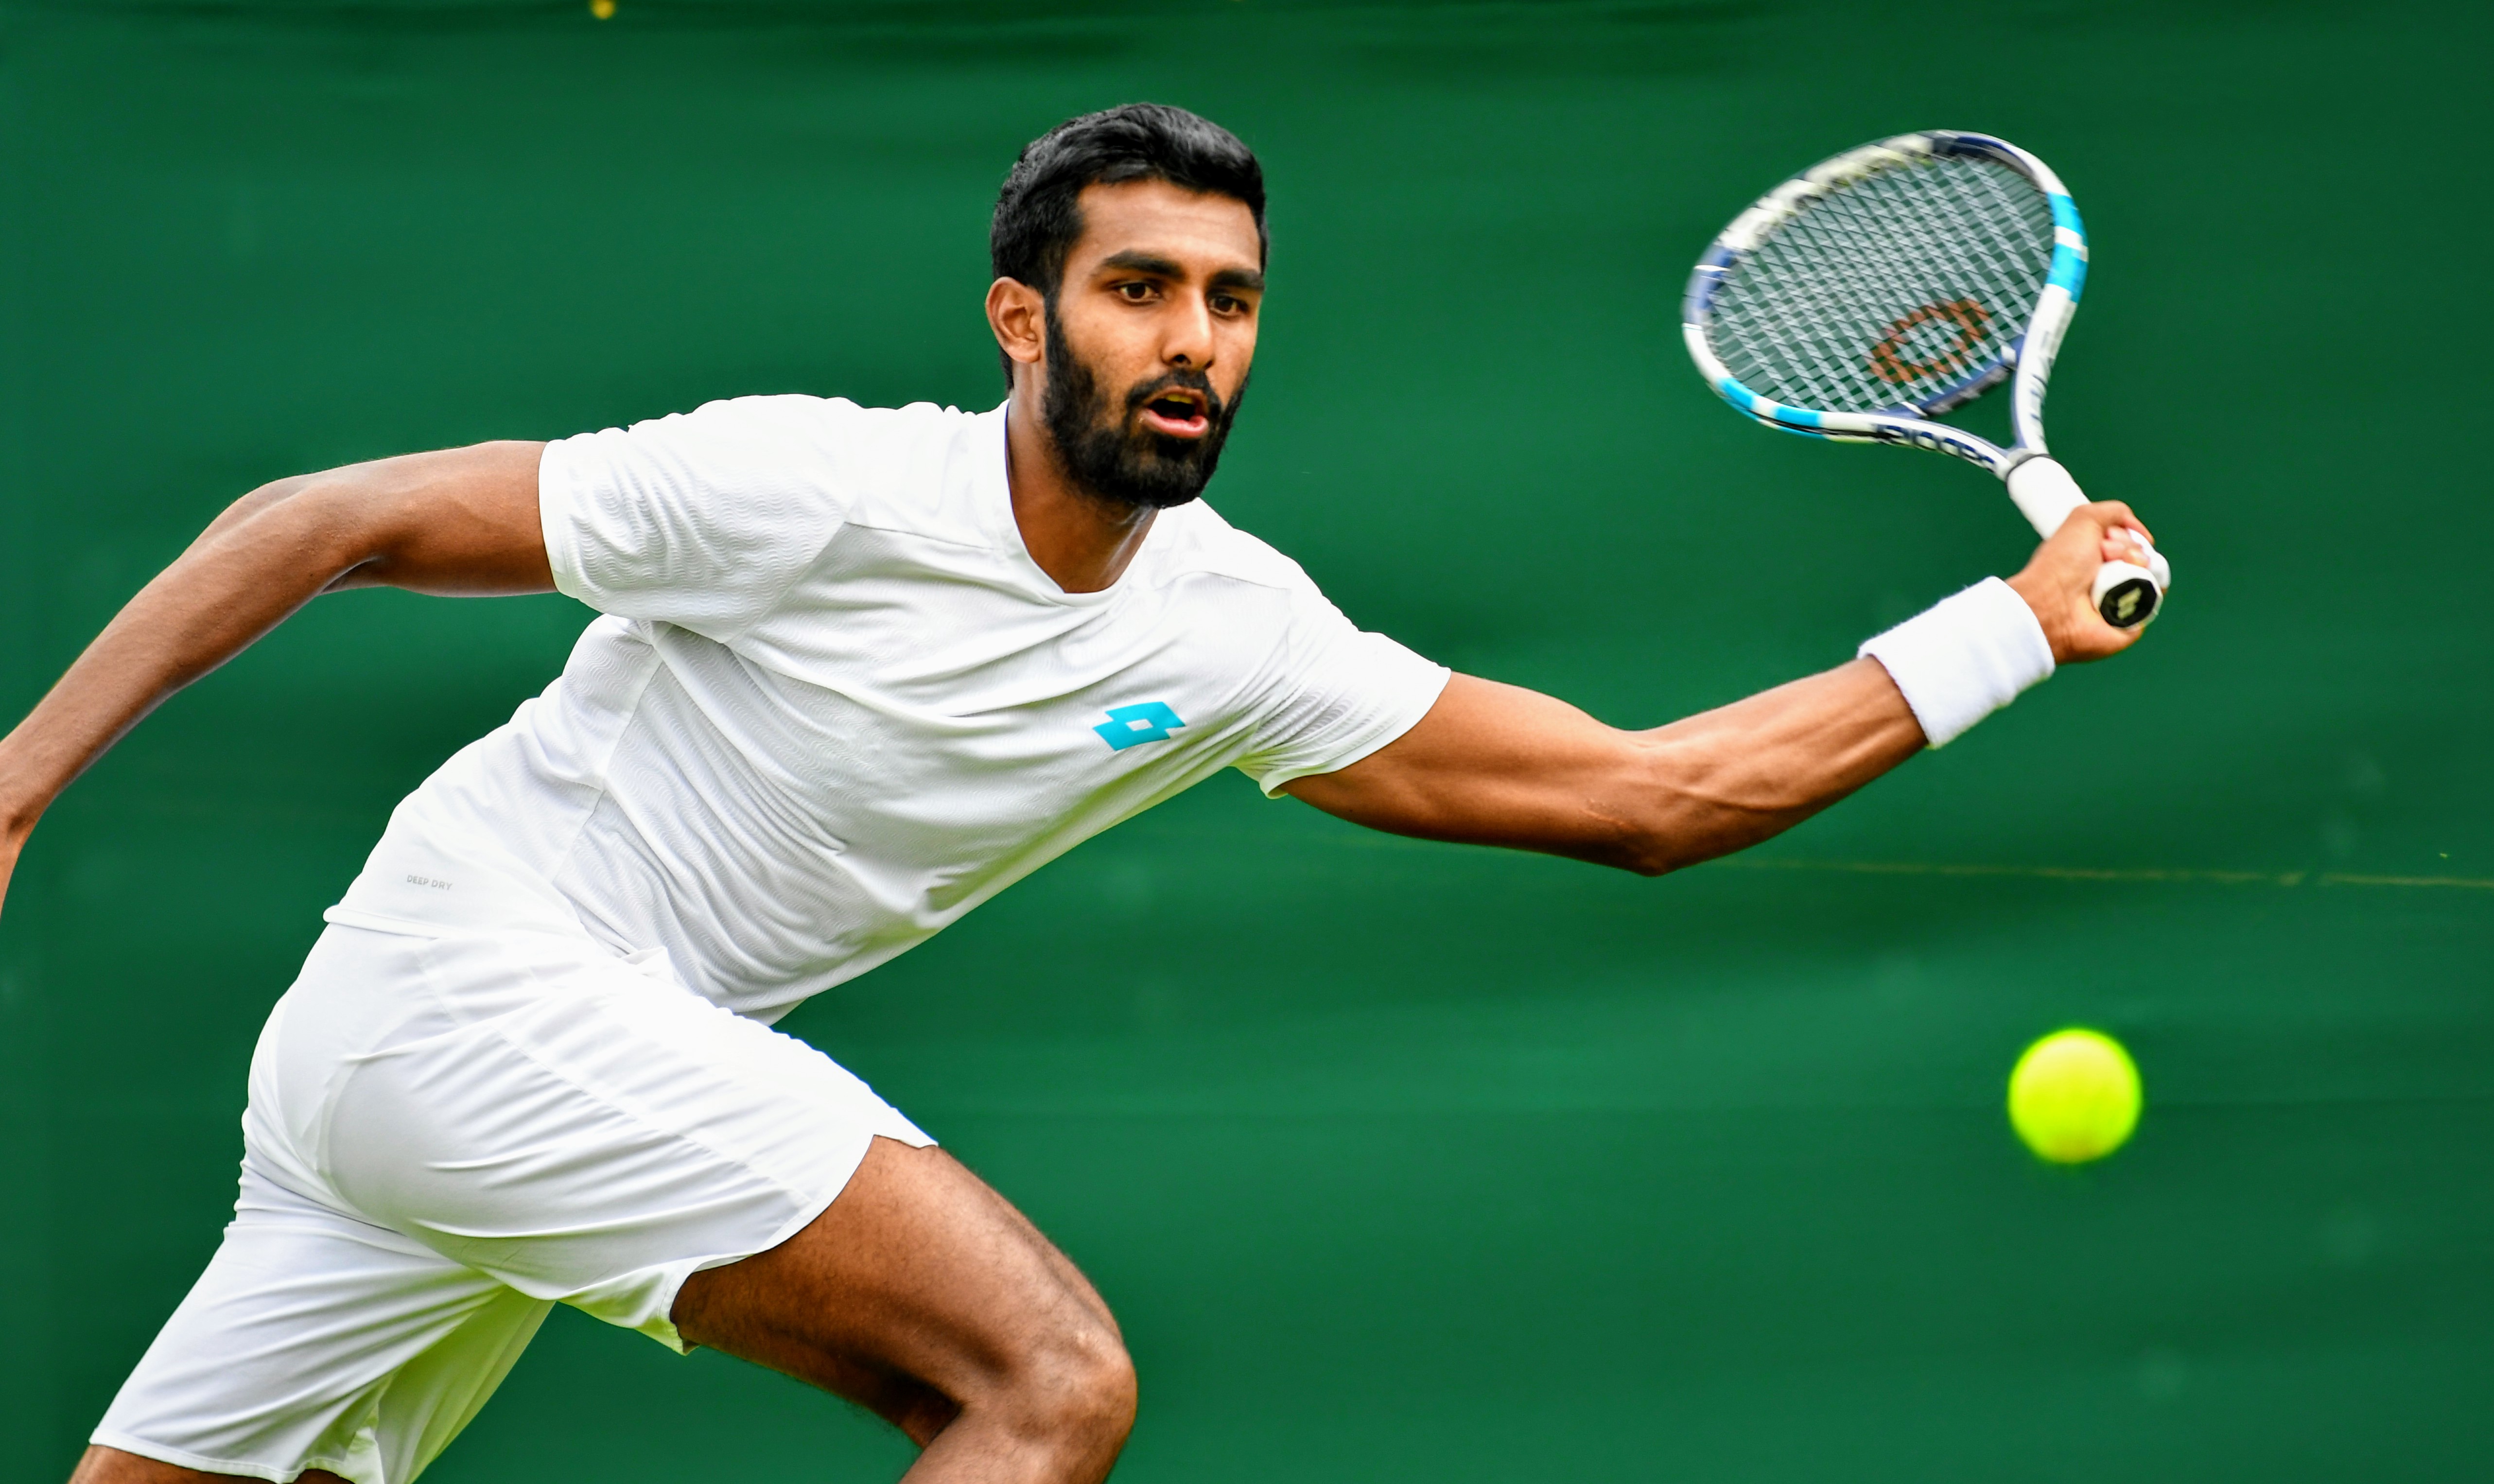 “I twisted my ankle at 2-2 in the first set and unfortunately, that was that” – Prajnesh Gunneswaran